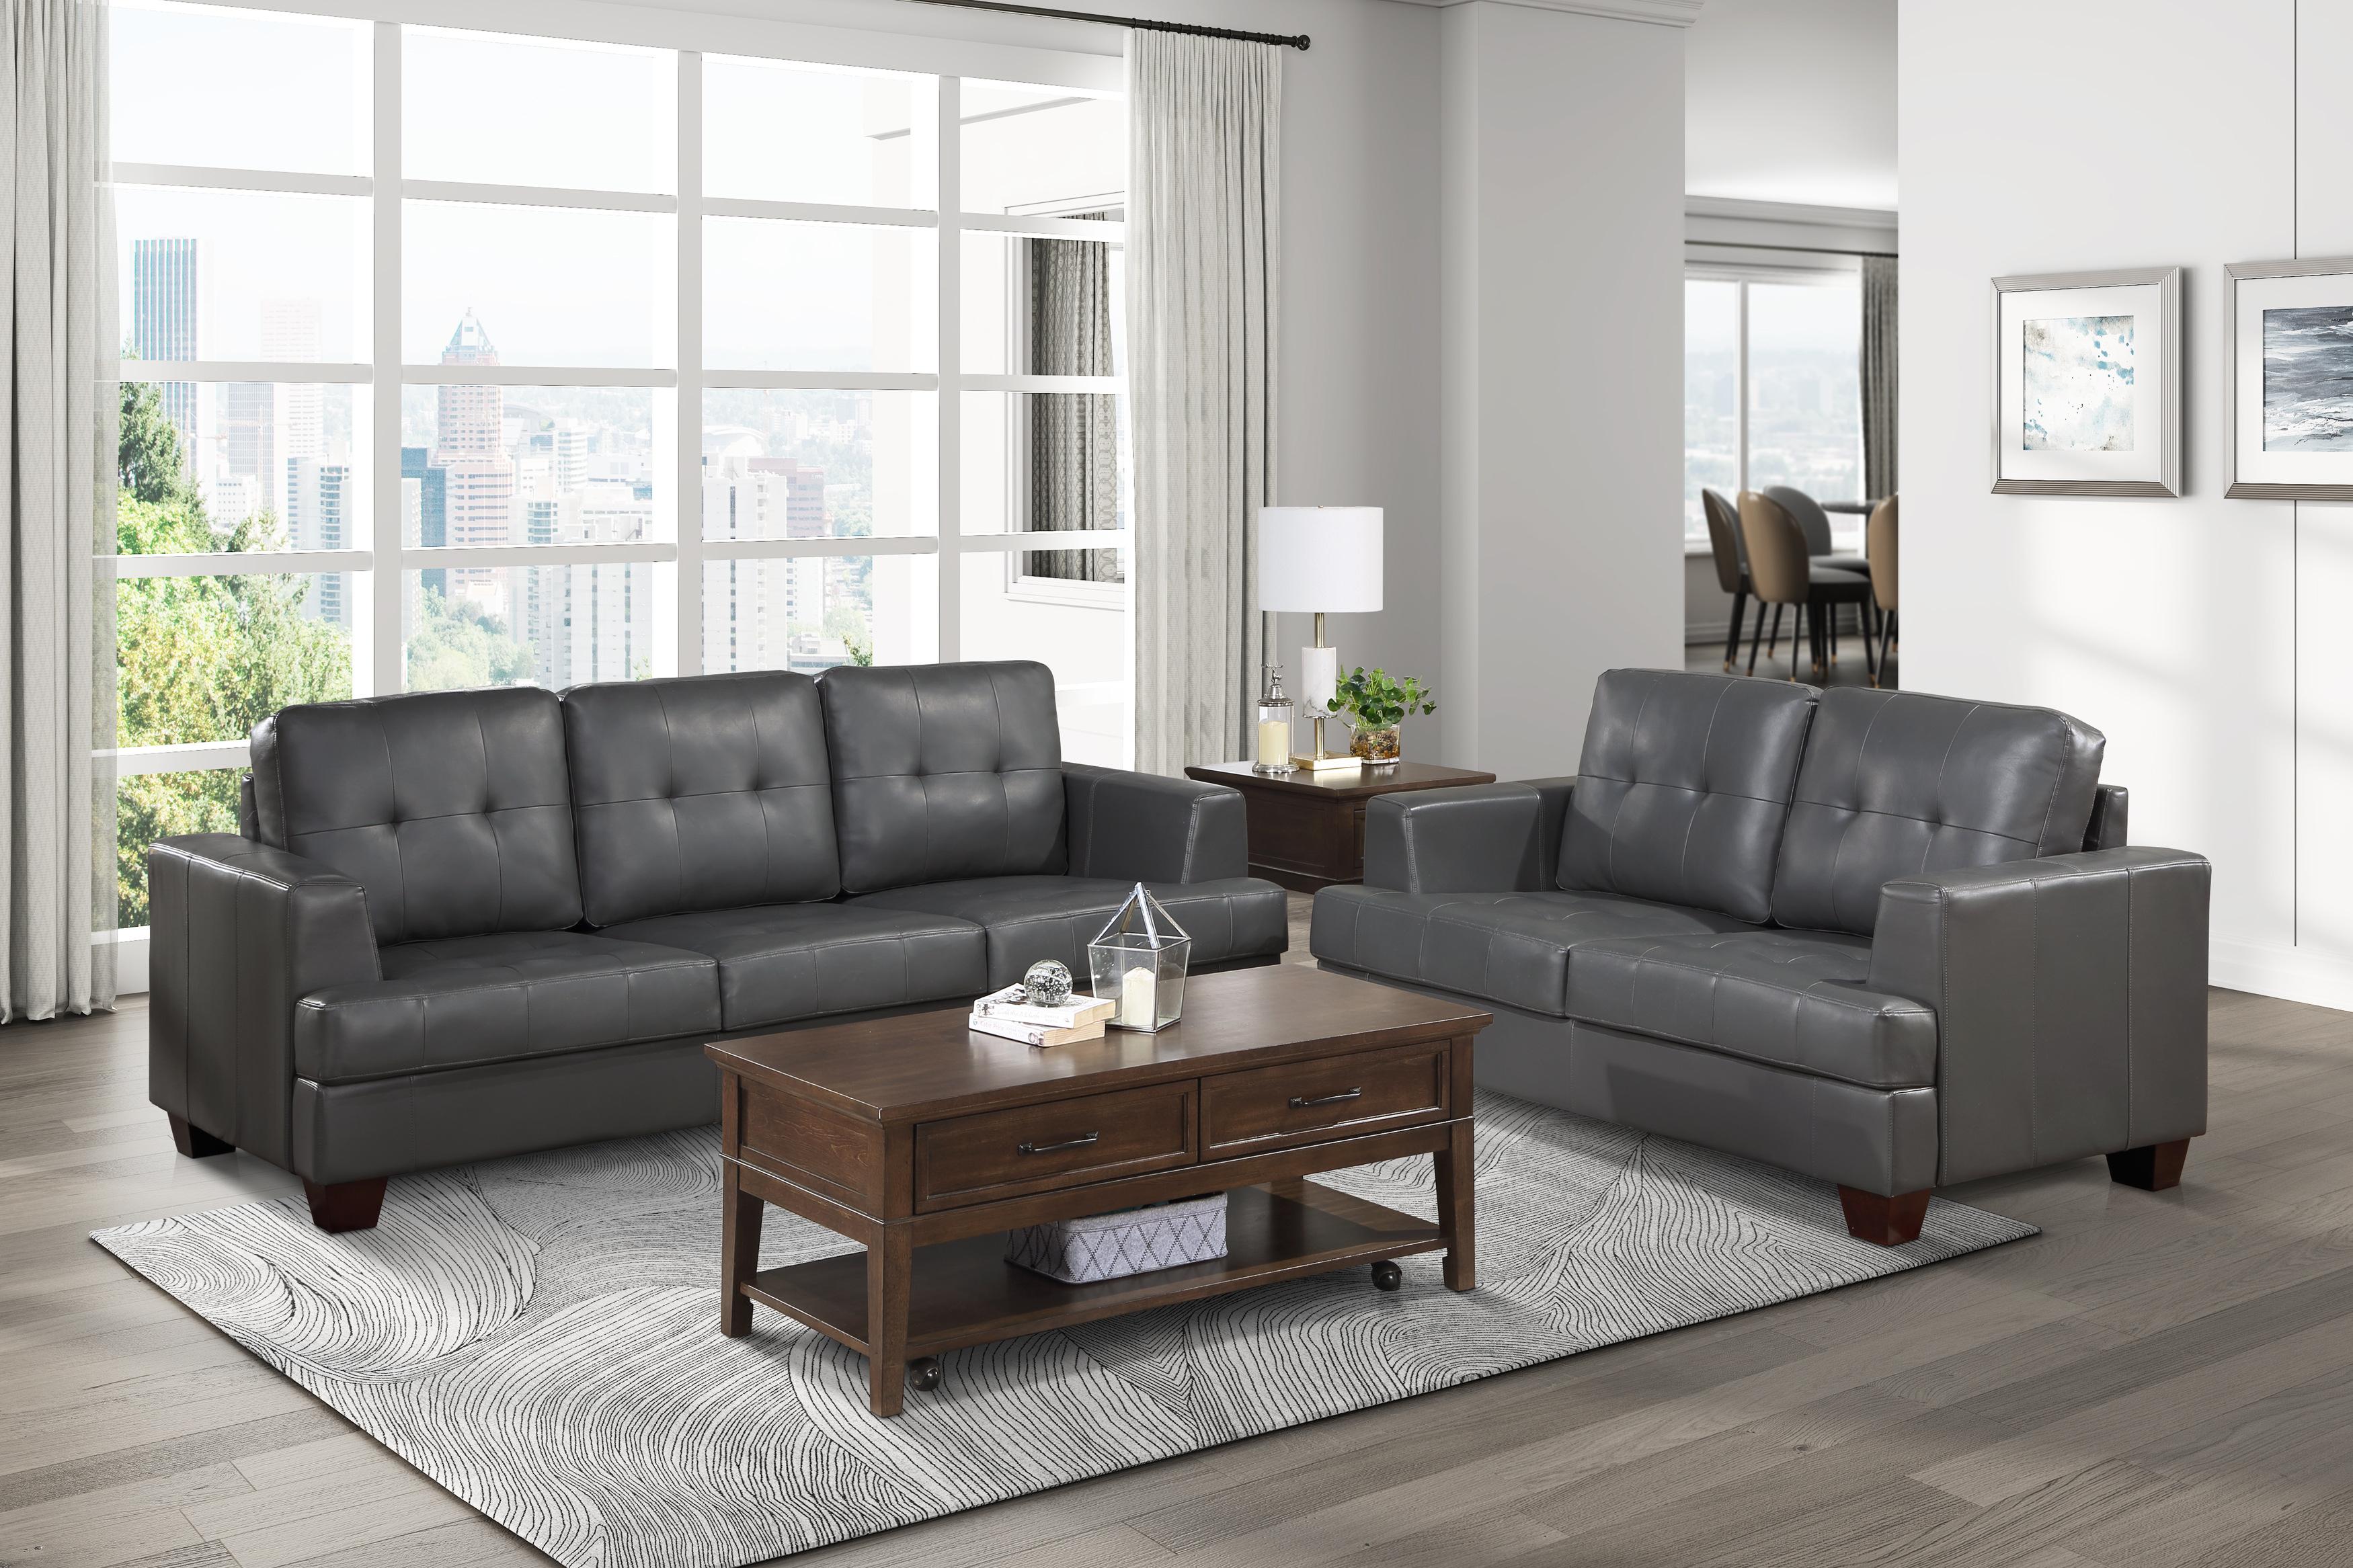 Modern Living Room Set 9309GY-2PC Hinsall 9309GY-2PC in Gray Faux Leather